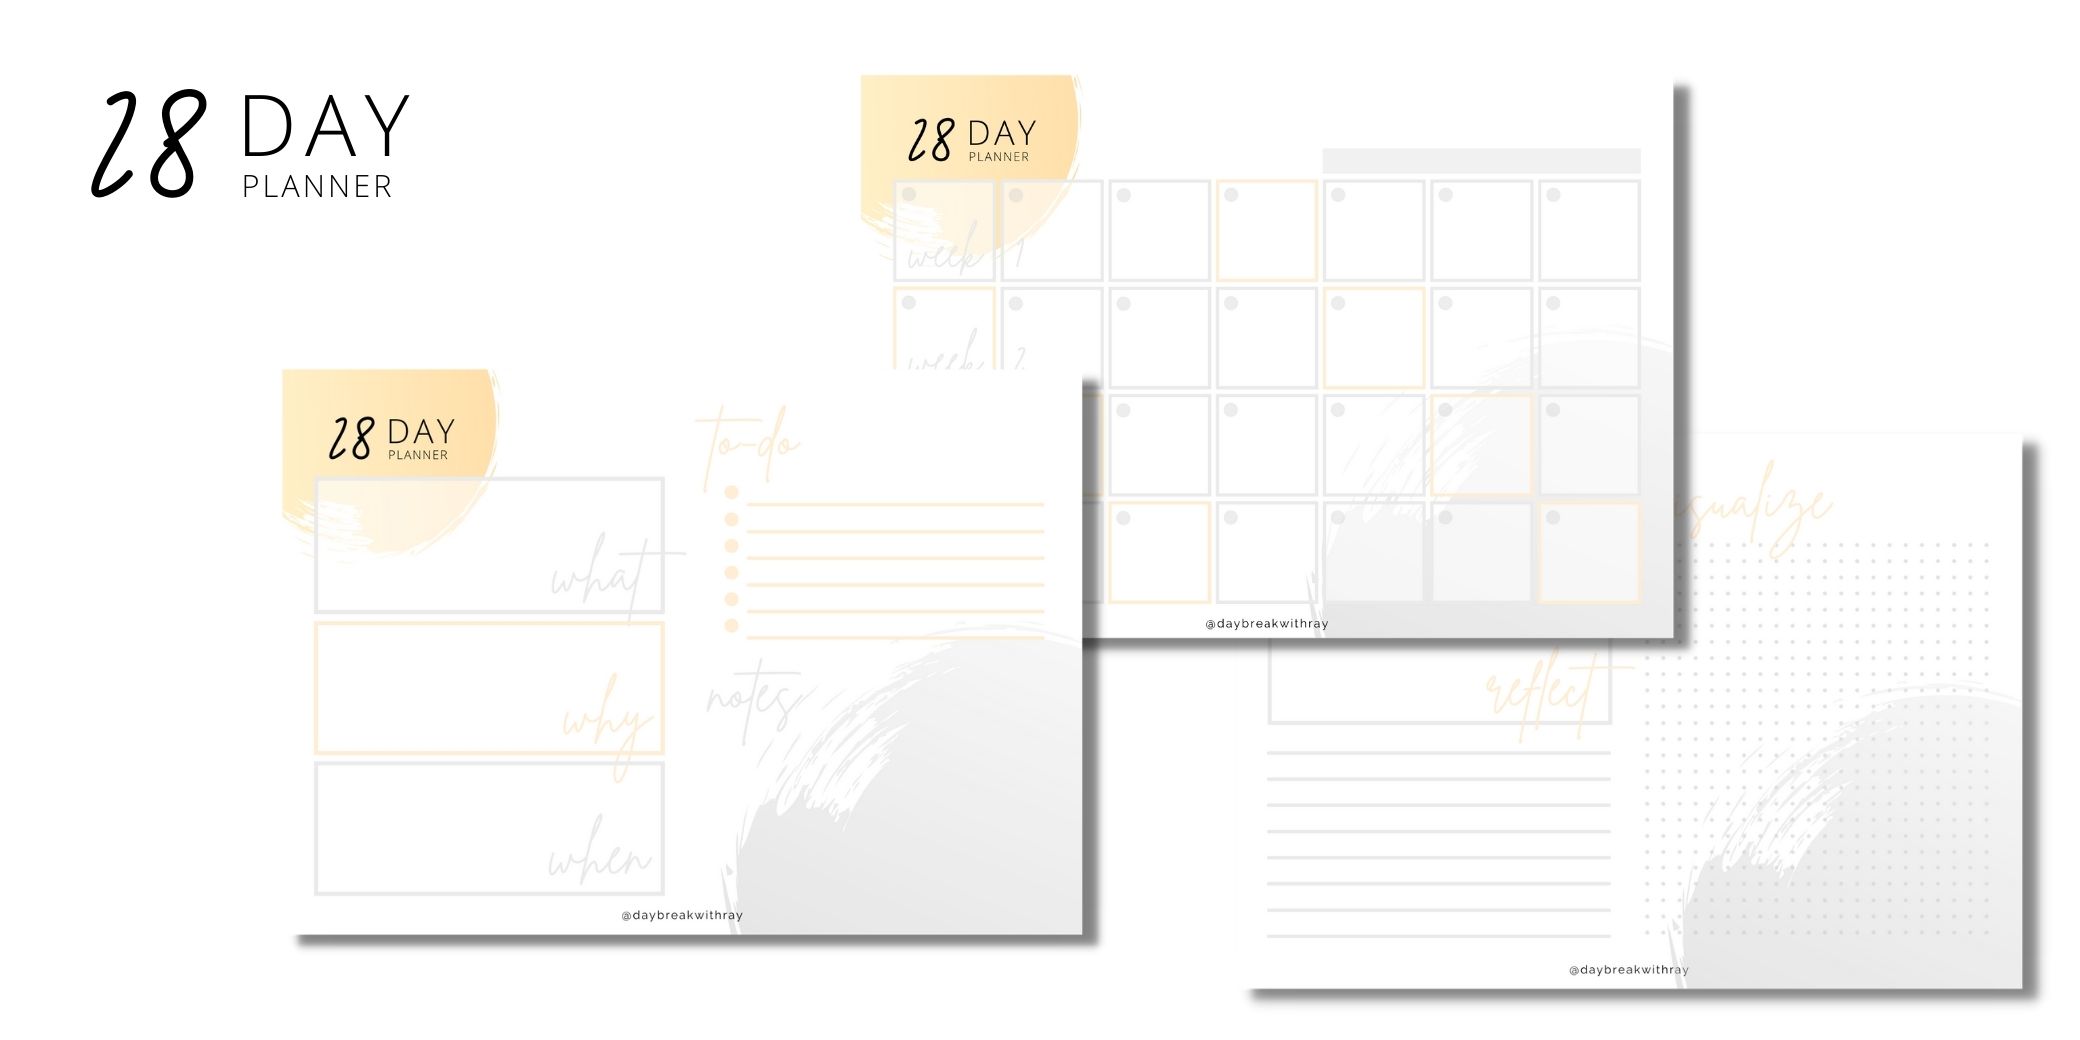 (Featured Image) 28-Day Planner